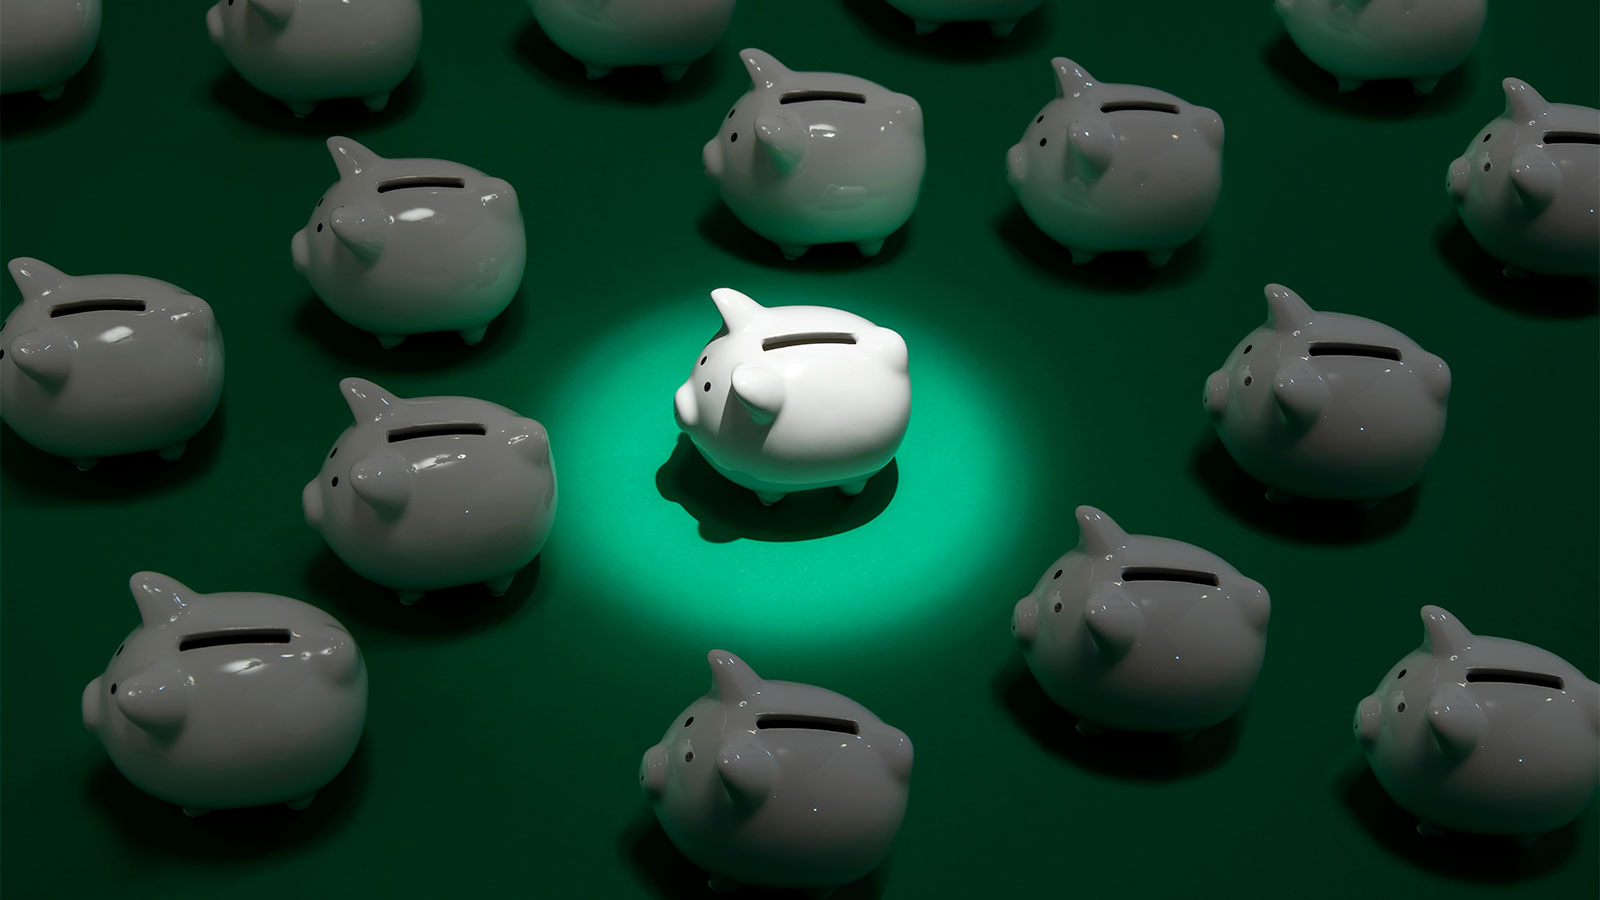 Many small white piggy banks on green surface with one piggy bank being spot lit